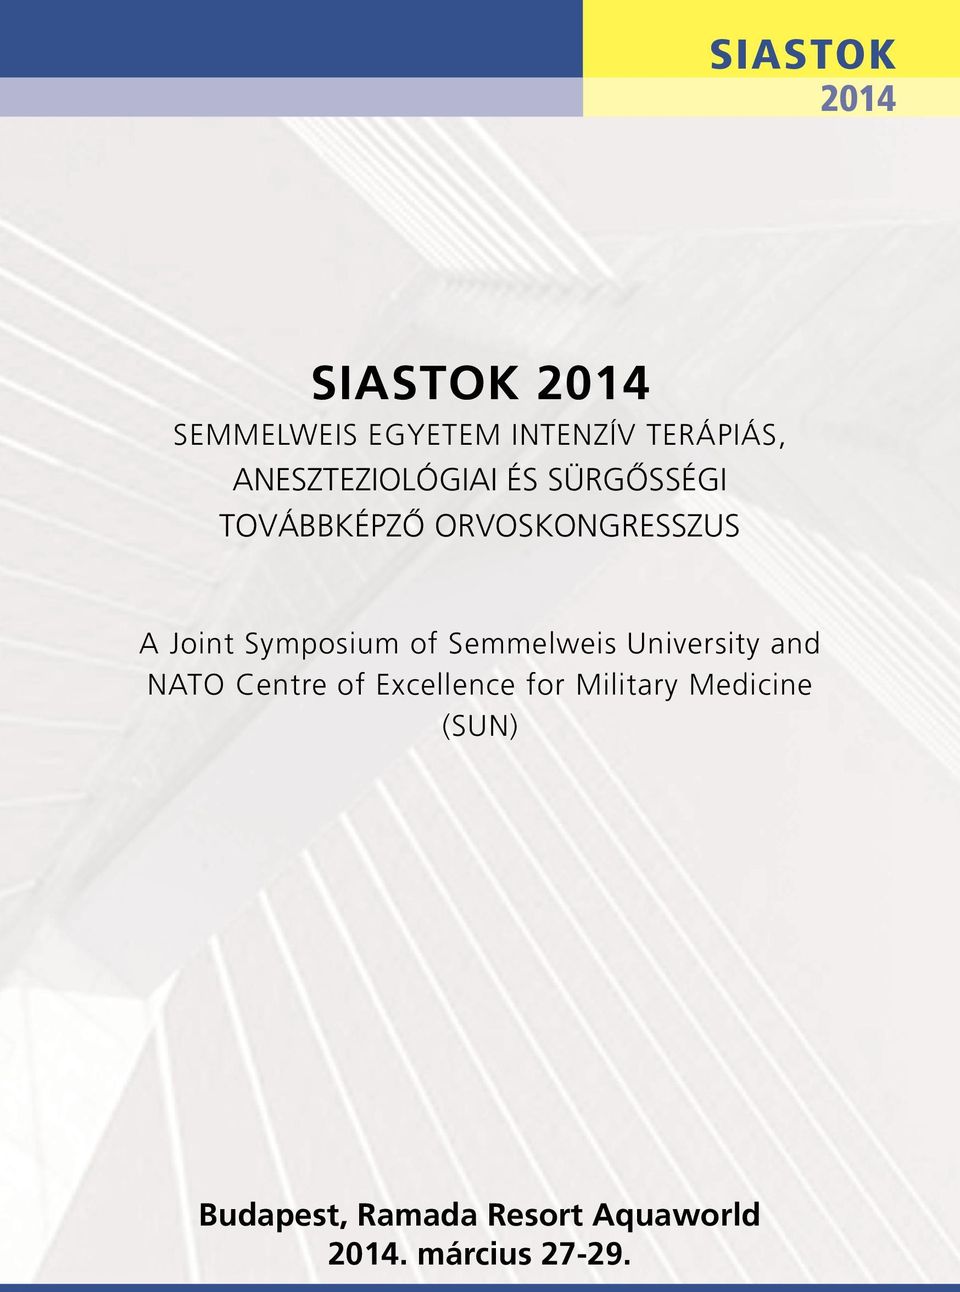 Joint Symposium of Semmelweis University and NATO Centre of